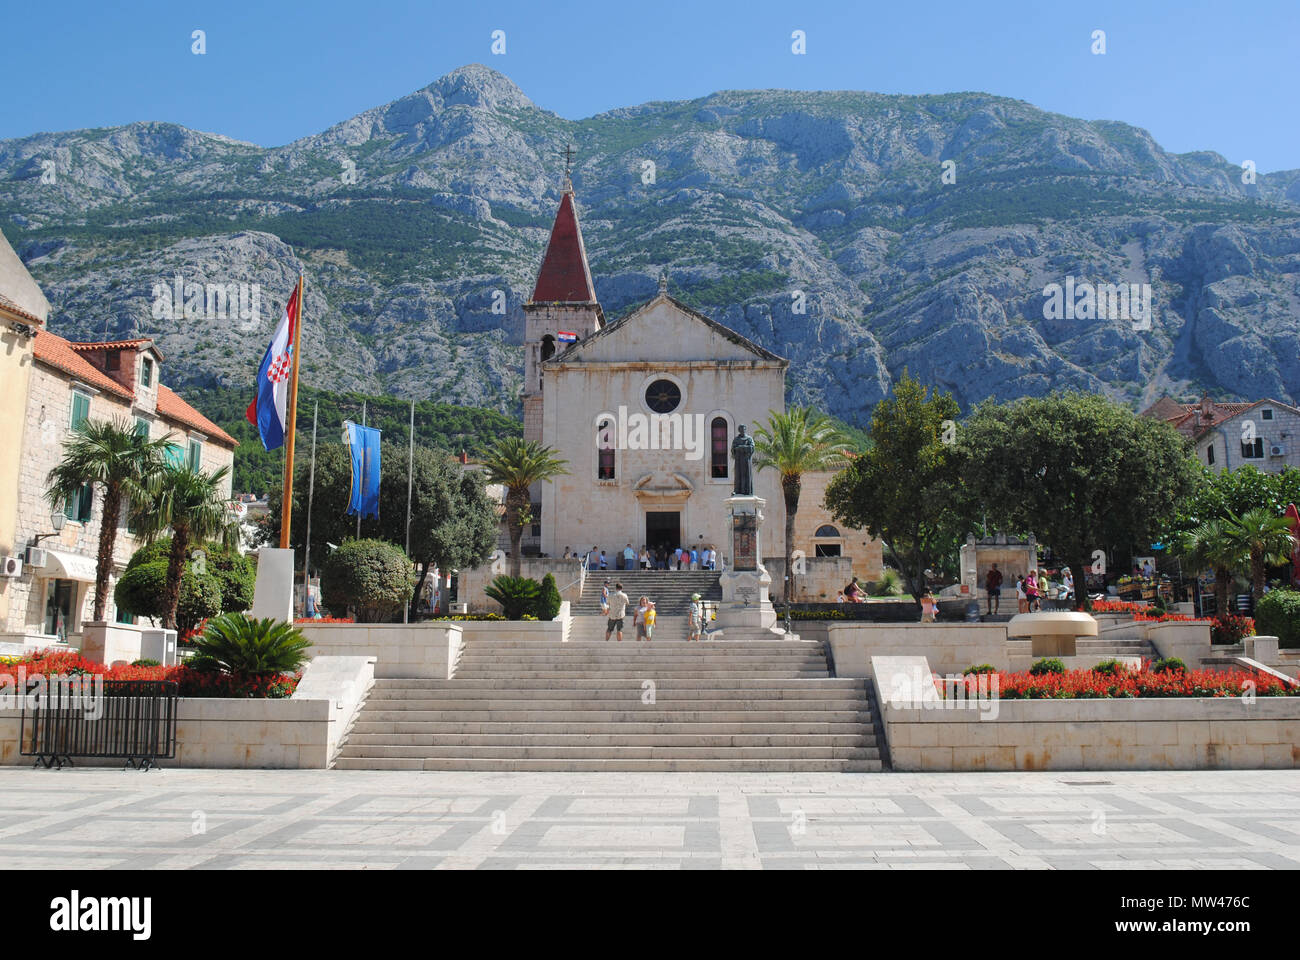 The church of St. Mark with the Biokovo mountain range in the background. Stock Photo